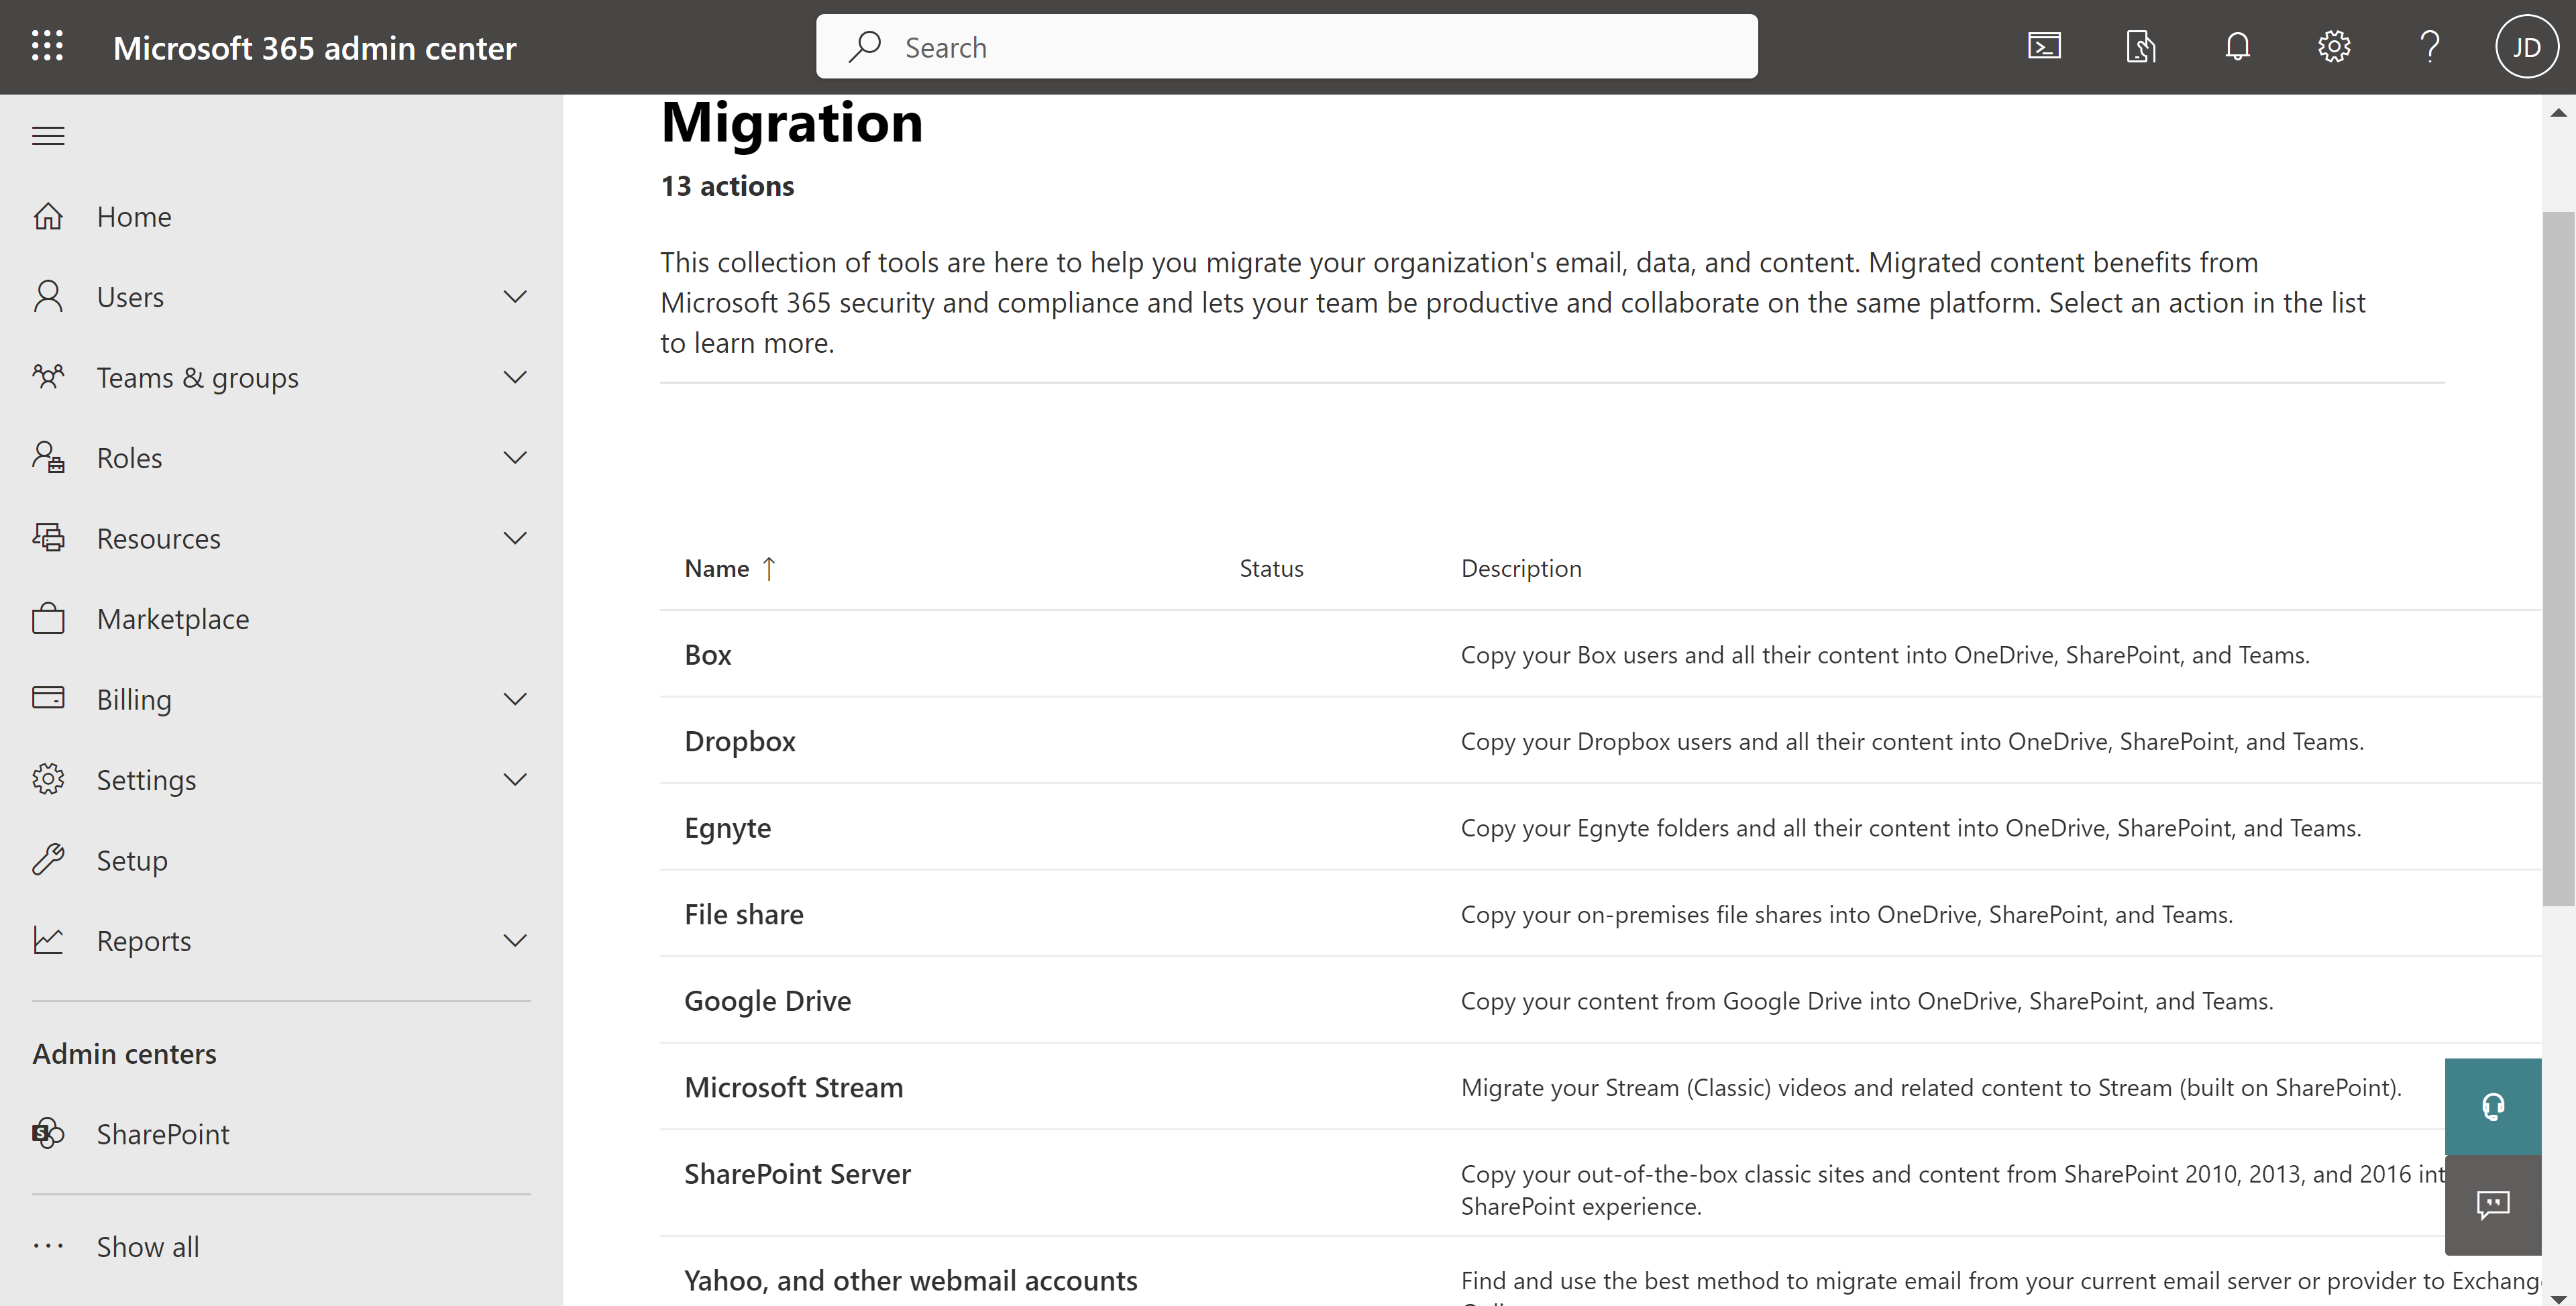 Migration tool page-Microsoft admin center 